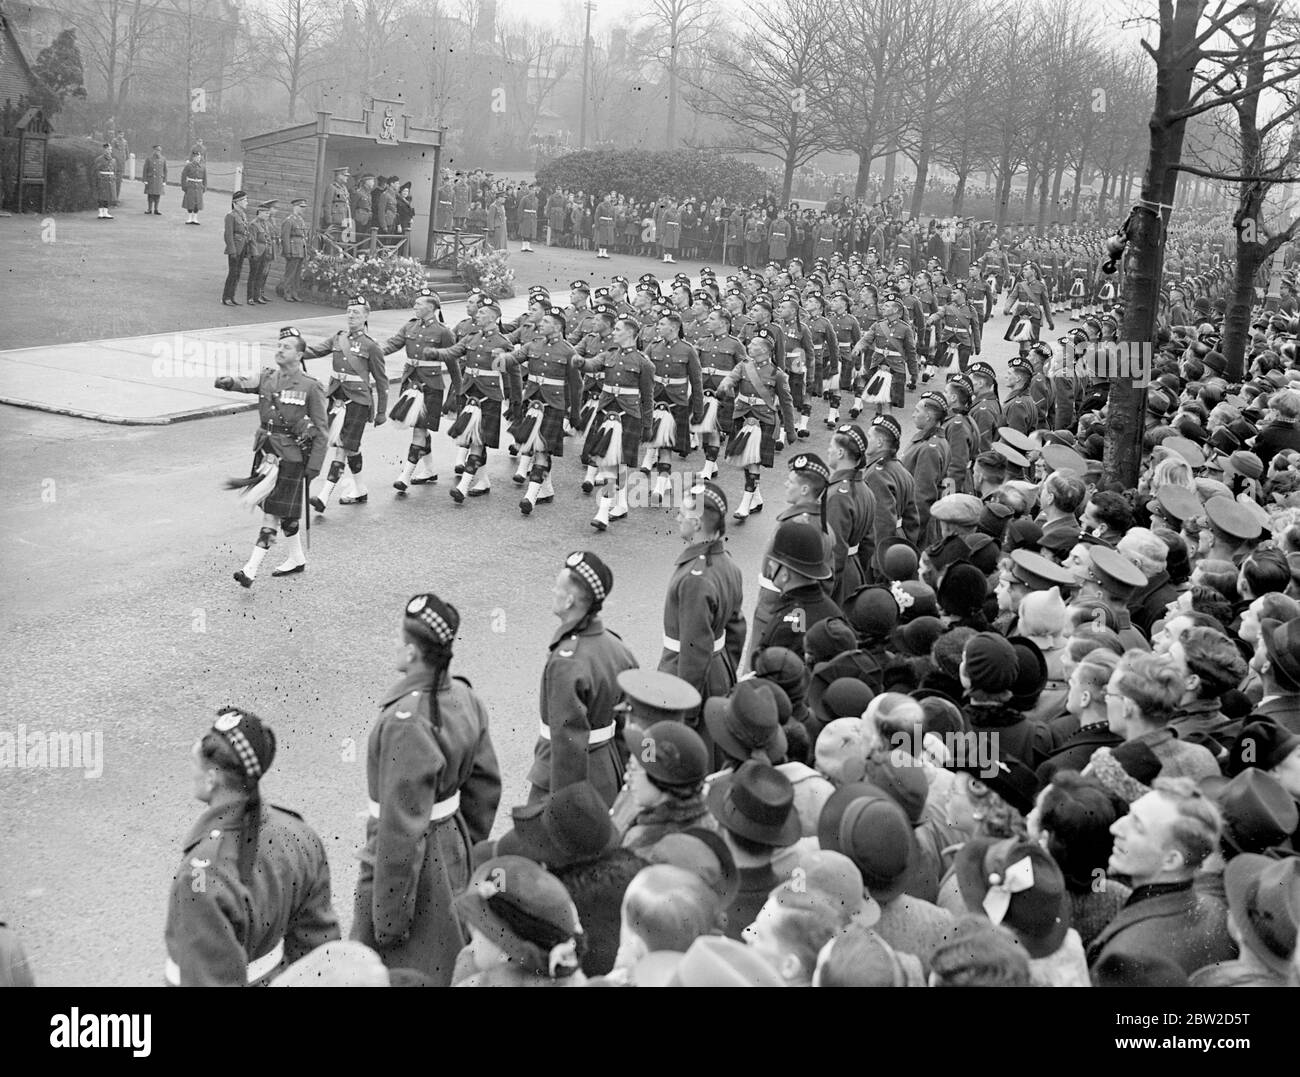 The King George VI and Queen Elizabeth, who have just returned from Sandringham, attended the dedication of the new West Wing of the St Andrews Garrison Church of Scotland at Aldershot Camp, Hampshire, and afterwards inspected the Scots regiments. Photo shows: The King and Queen at the saluting base as Scots troops march past 5 February 1939 Stock Photo